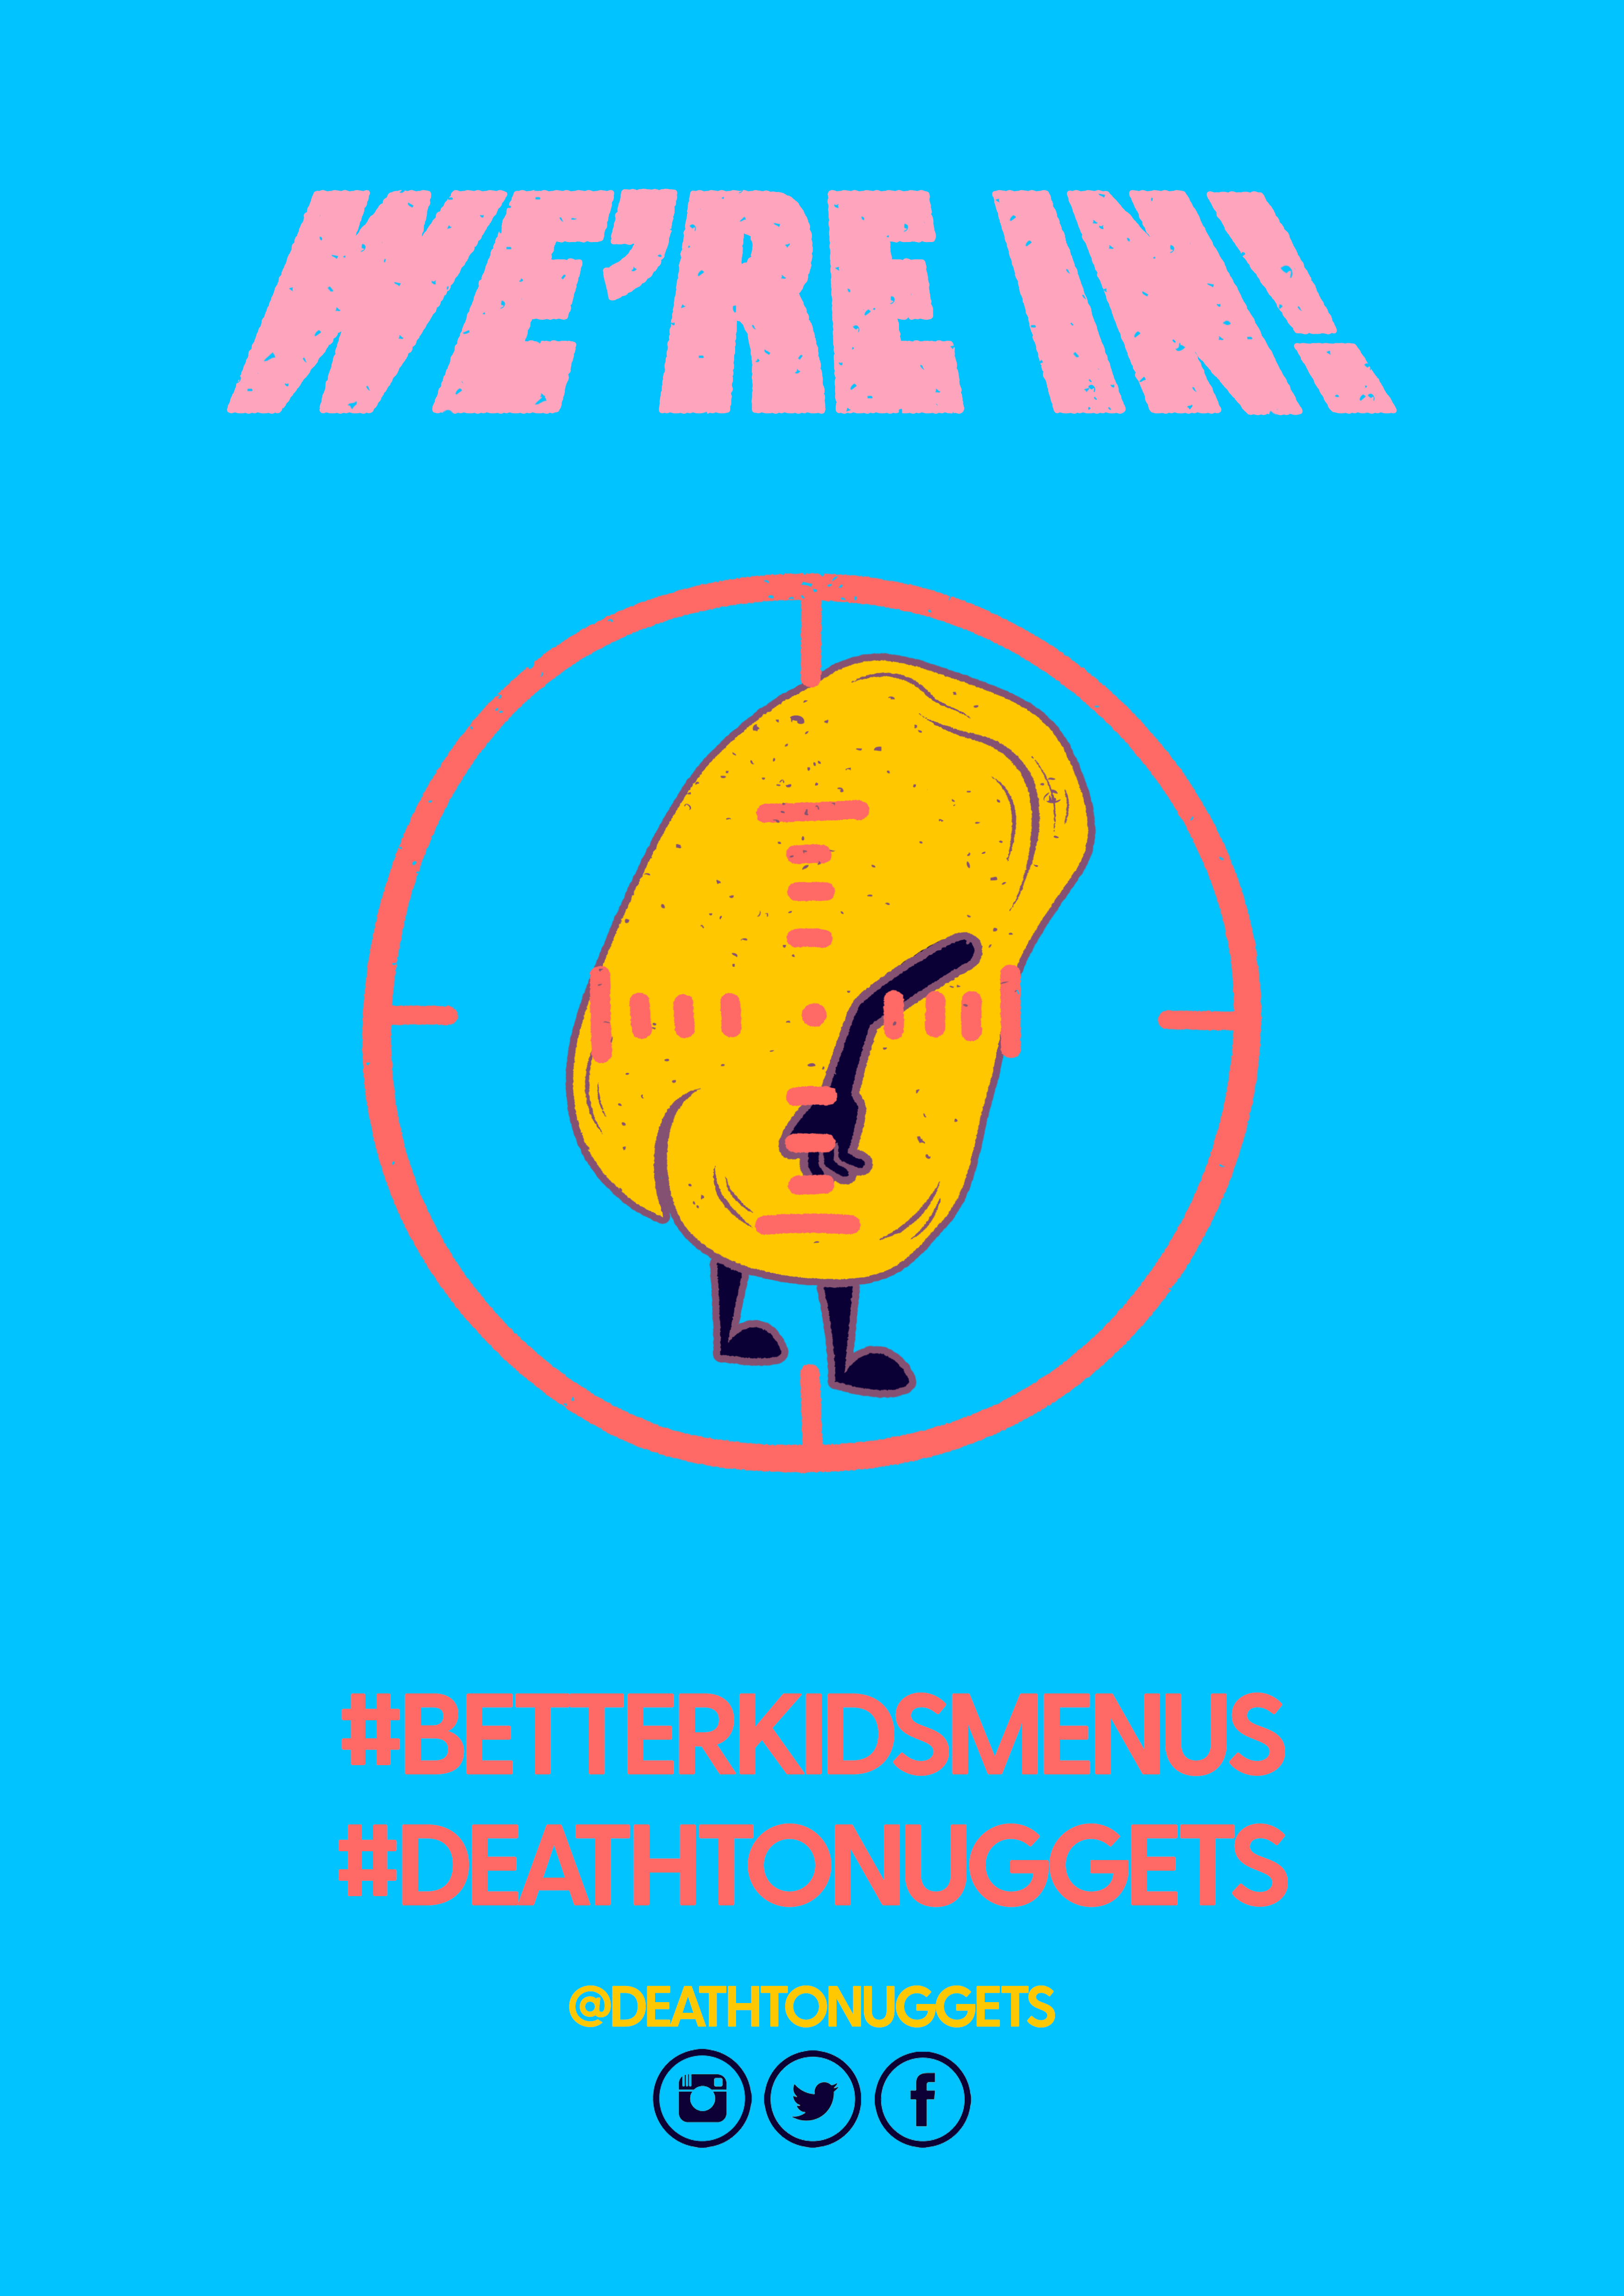 Poster with a blue background featuring a nugget with arms and legs in the centre of a tageting circle. Above the nugget are the words We're In! in pink and below the nugget are the words #betterkidsmenus #deathtonuggets and www.deathtonuggets.com.au